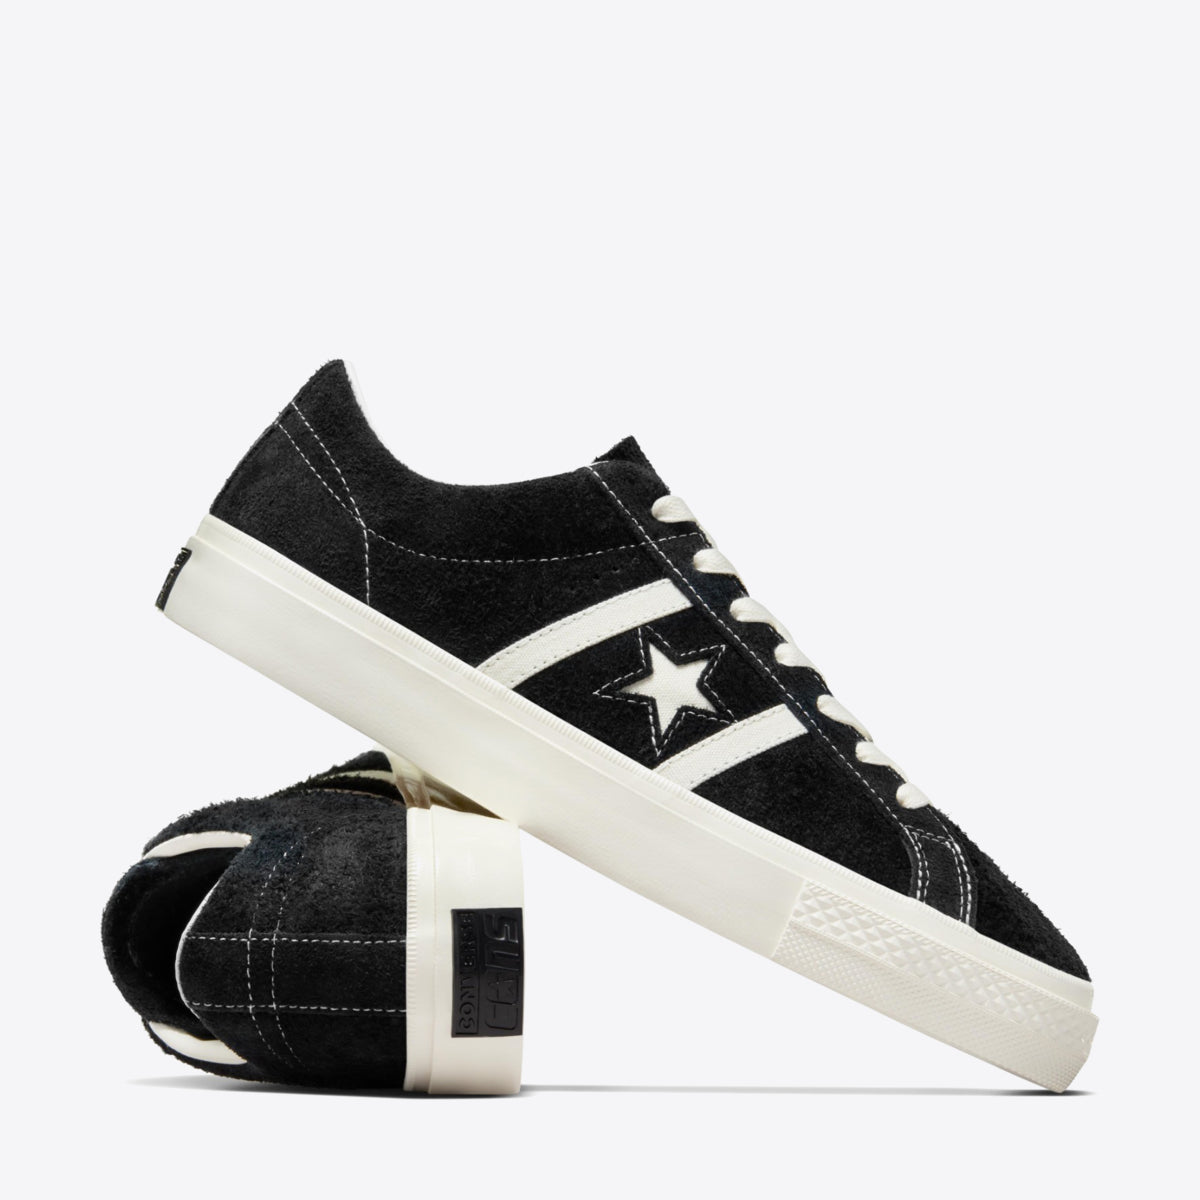 CONVERSE One Star Academy Pro Low Black/Egret - Image 8